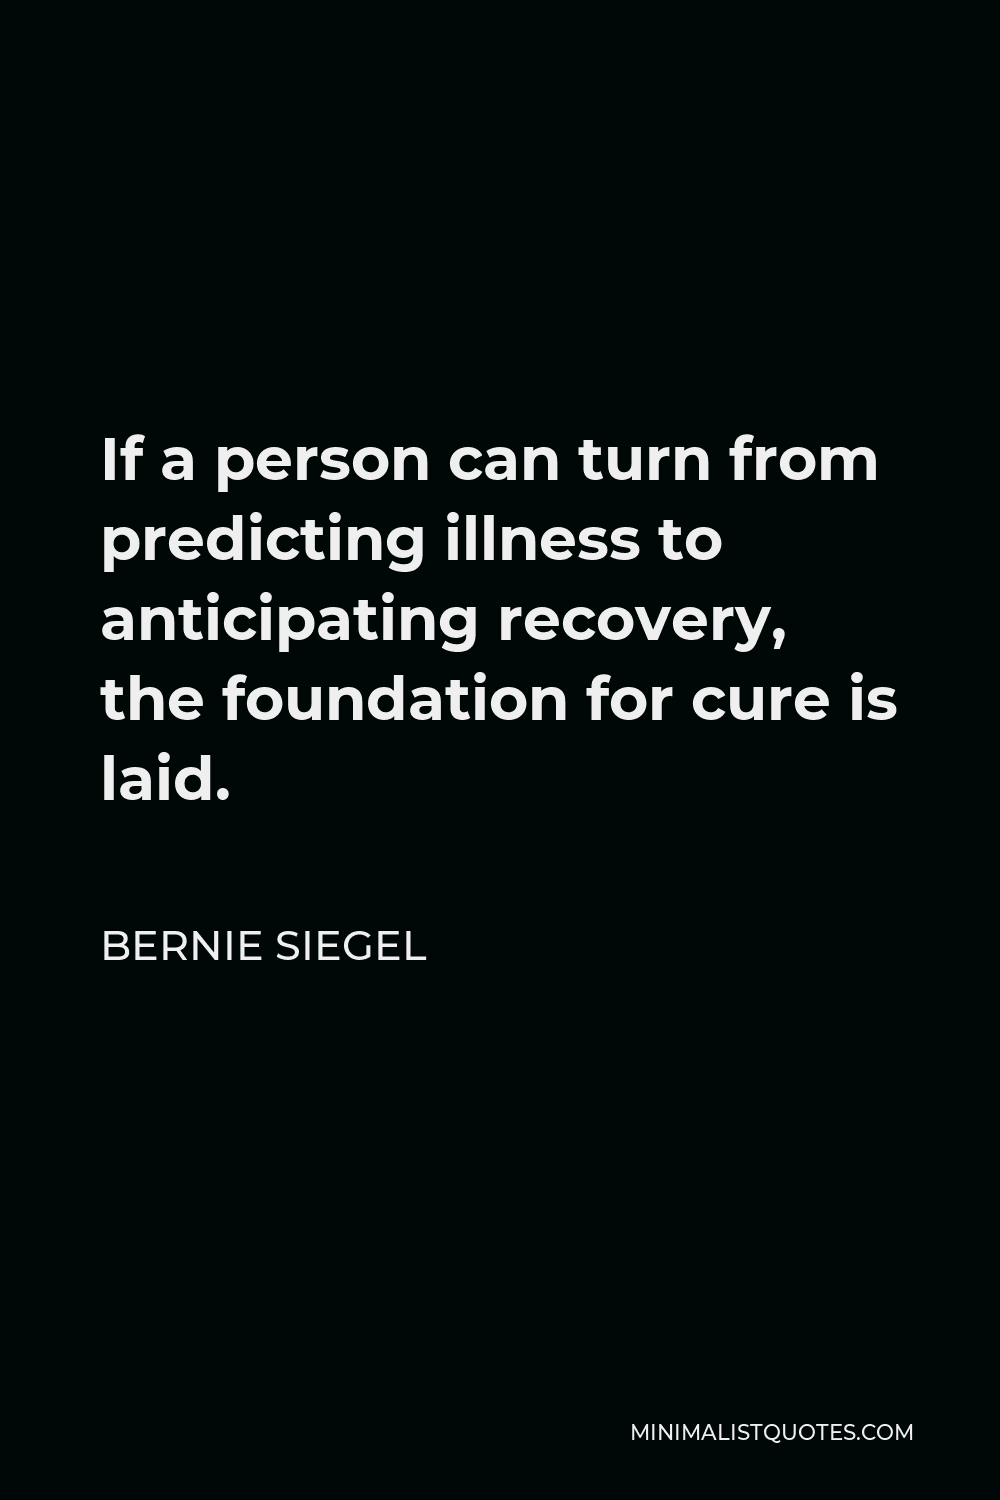 Bernie Siegel Quote - If a person can turn from predicting illness to anticipating recovery, the foundation for cure is laid.